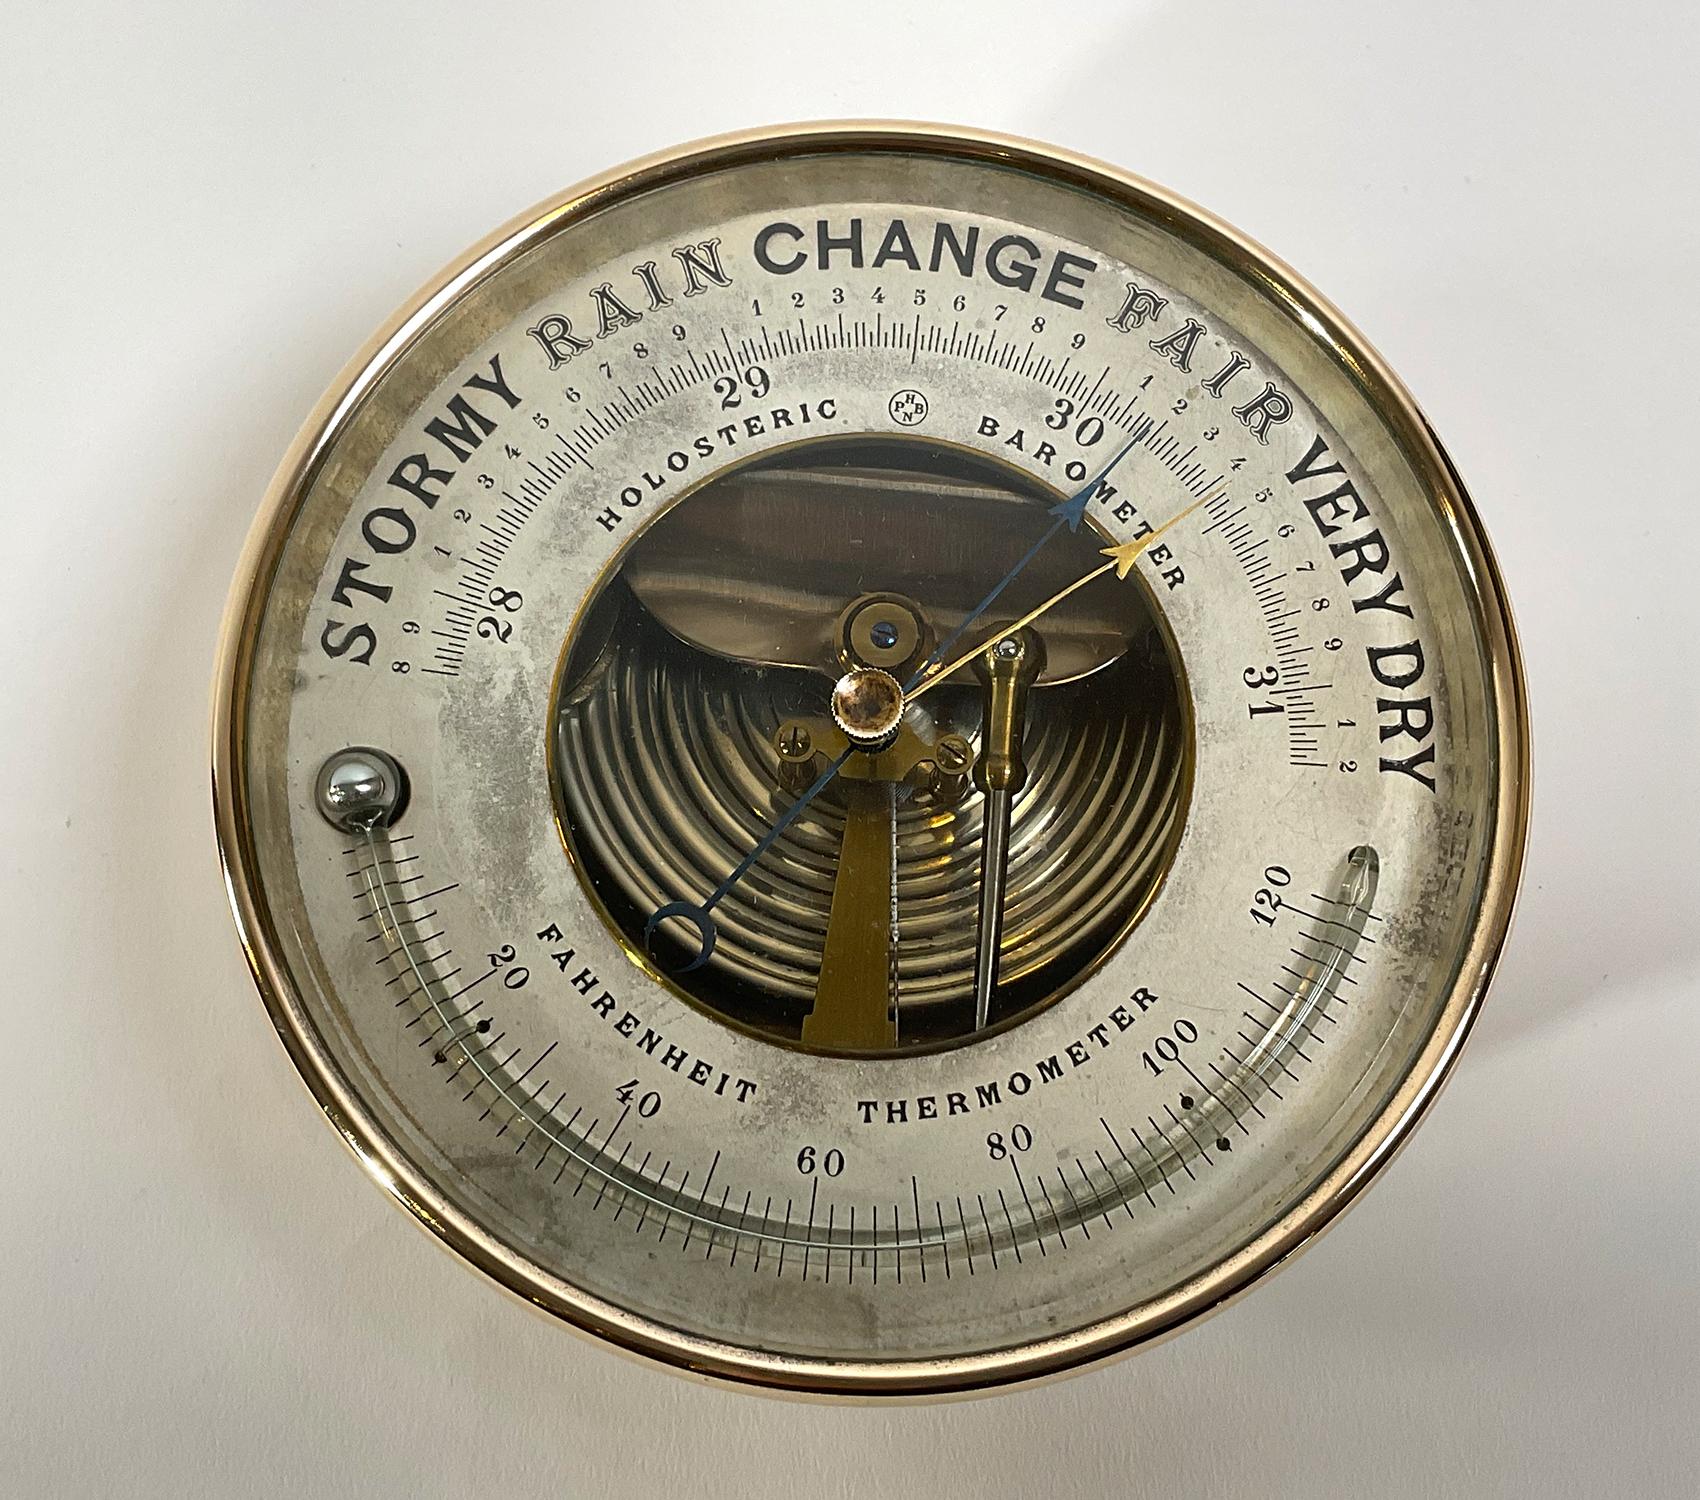 Antique French brass Halosteric barometer. With logo HNPB. Polished brass case. Beveled glass. Hanging loop. French made. Circa 1940.